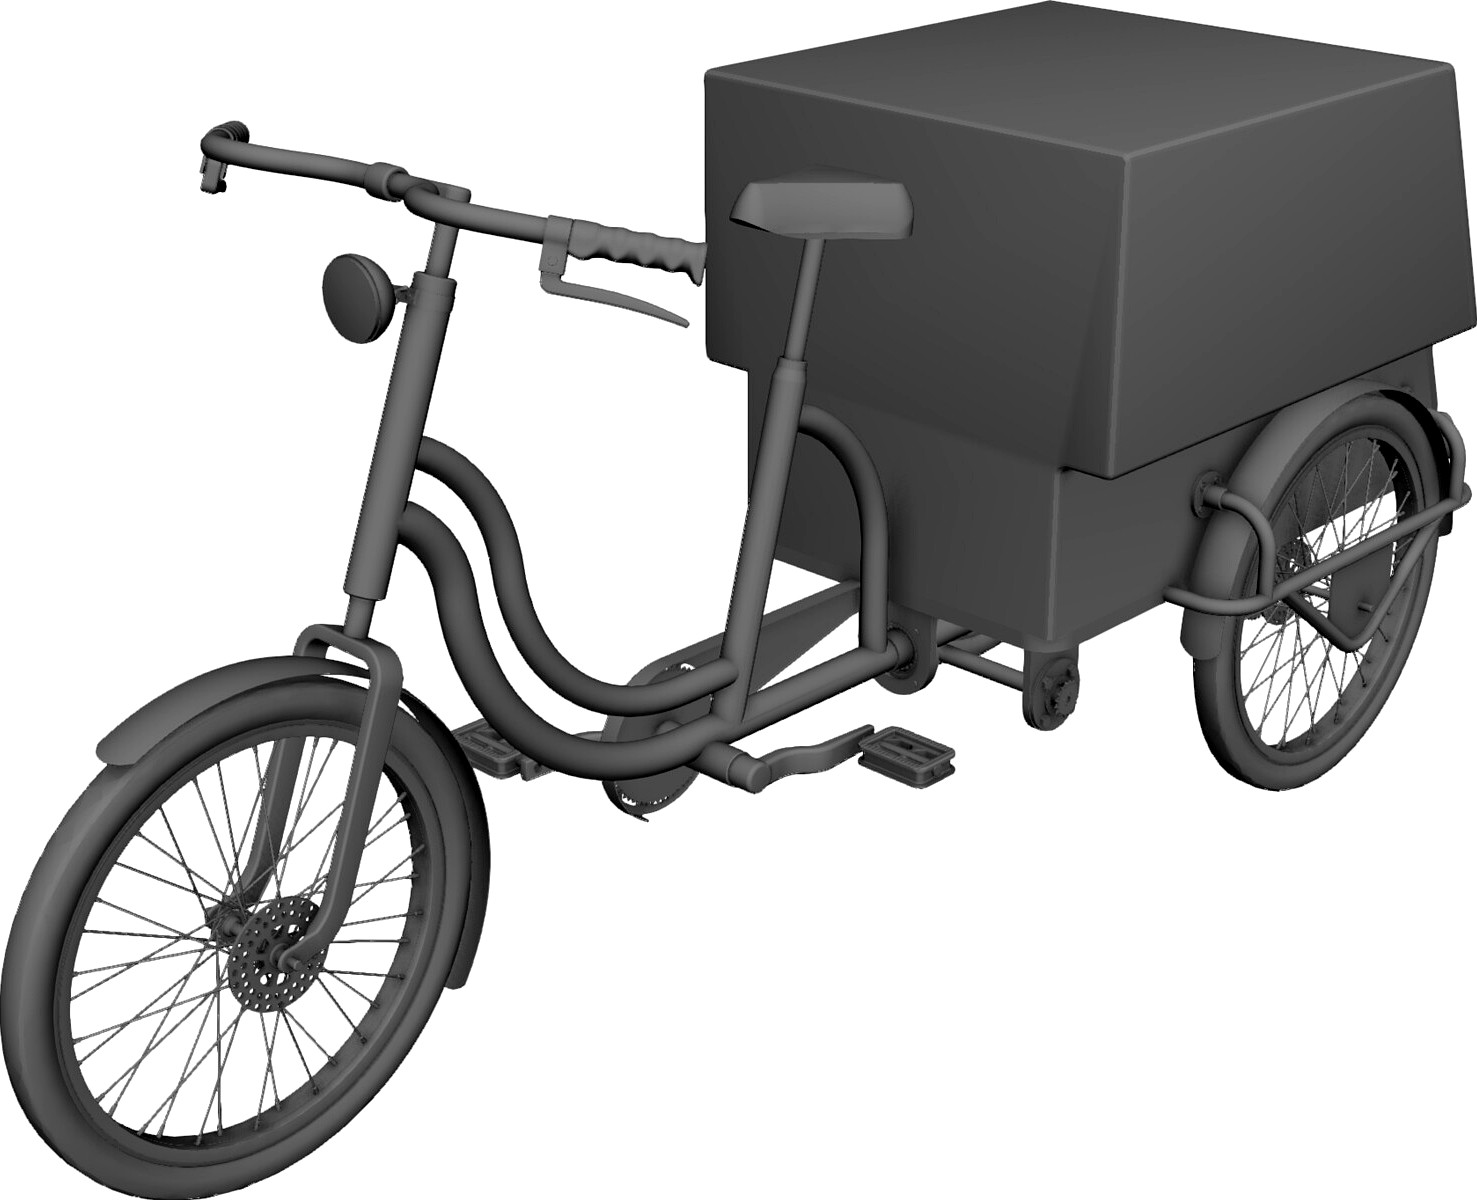 TriCycle 3D CAD Model